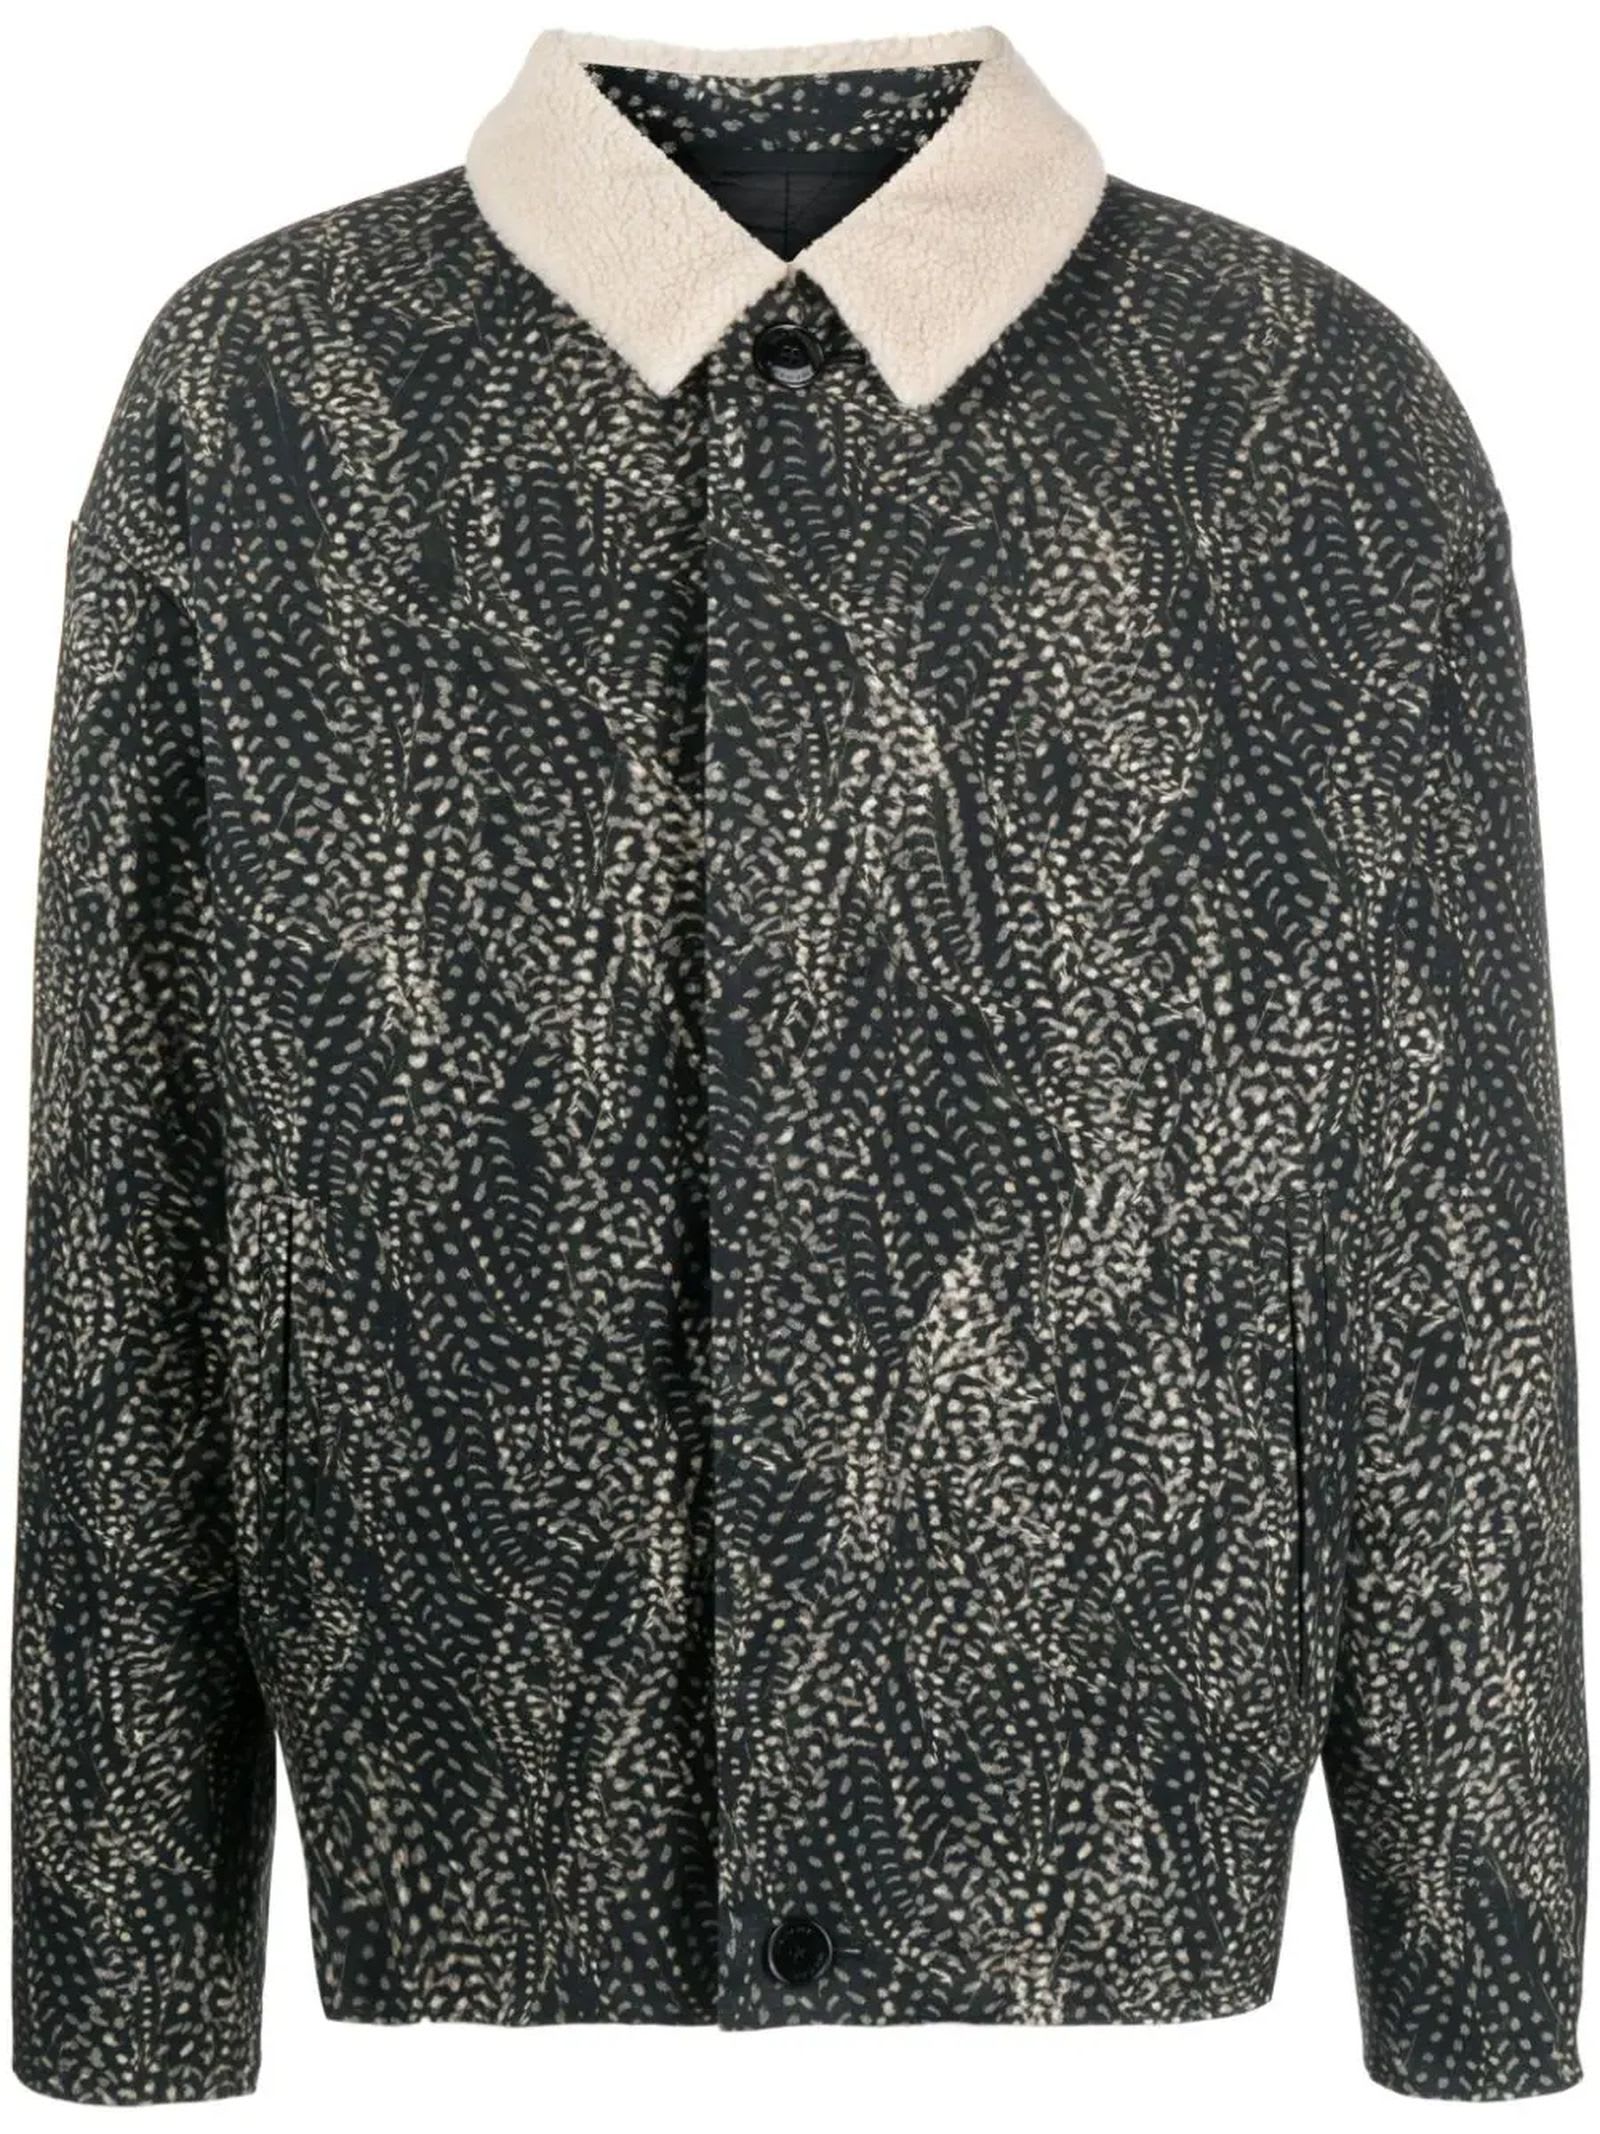 ISABEL MARANT GUSTAVE ABSTRACT-PRINT COTTON JACKET